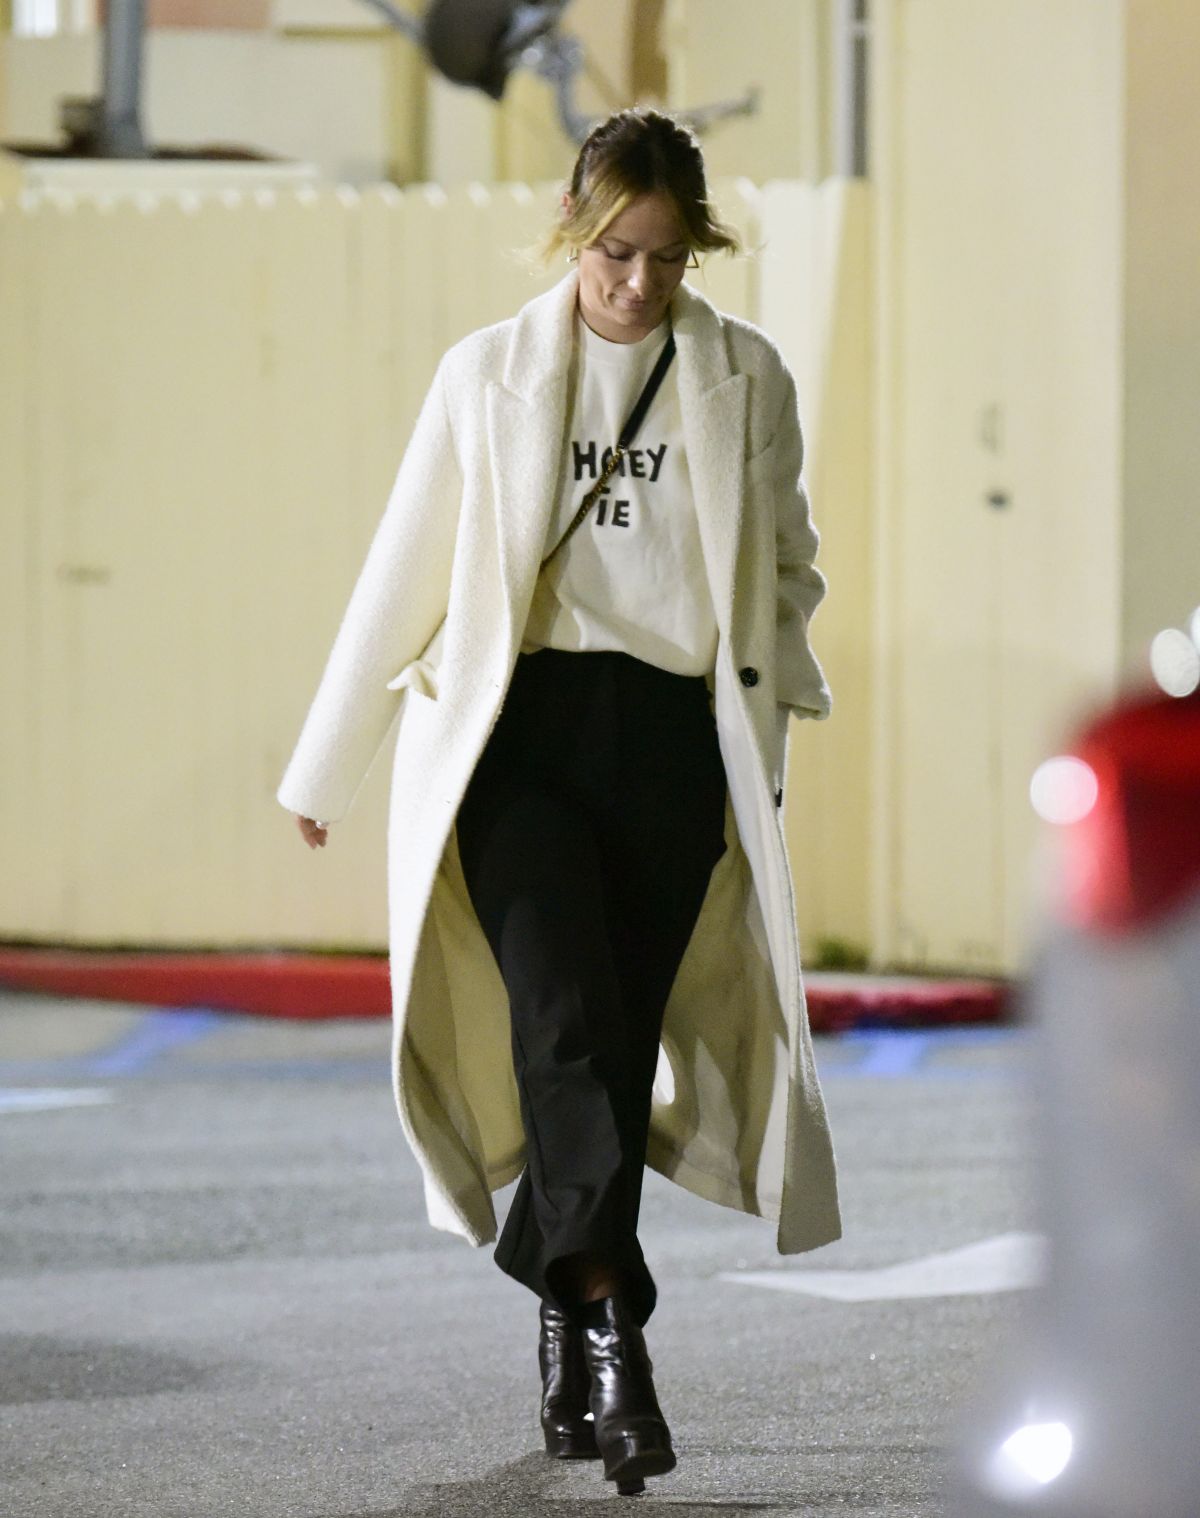 OLIVIA WILDE Gets Ready for a Night on the Town in Santa Monica 04/01 ...